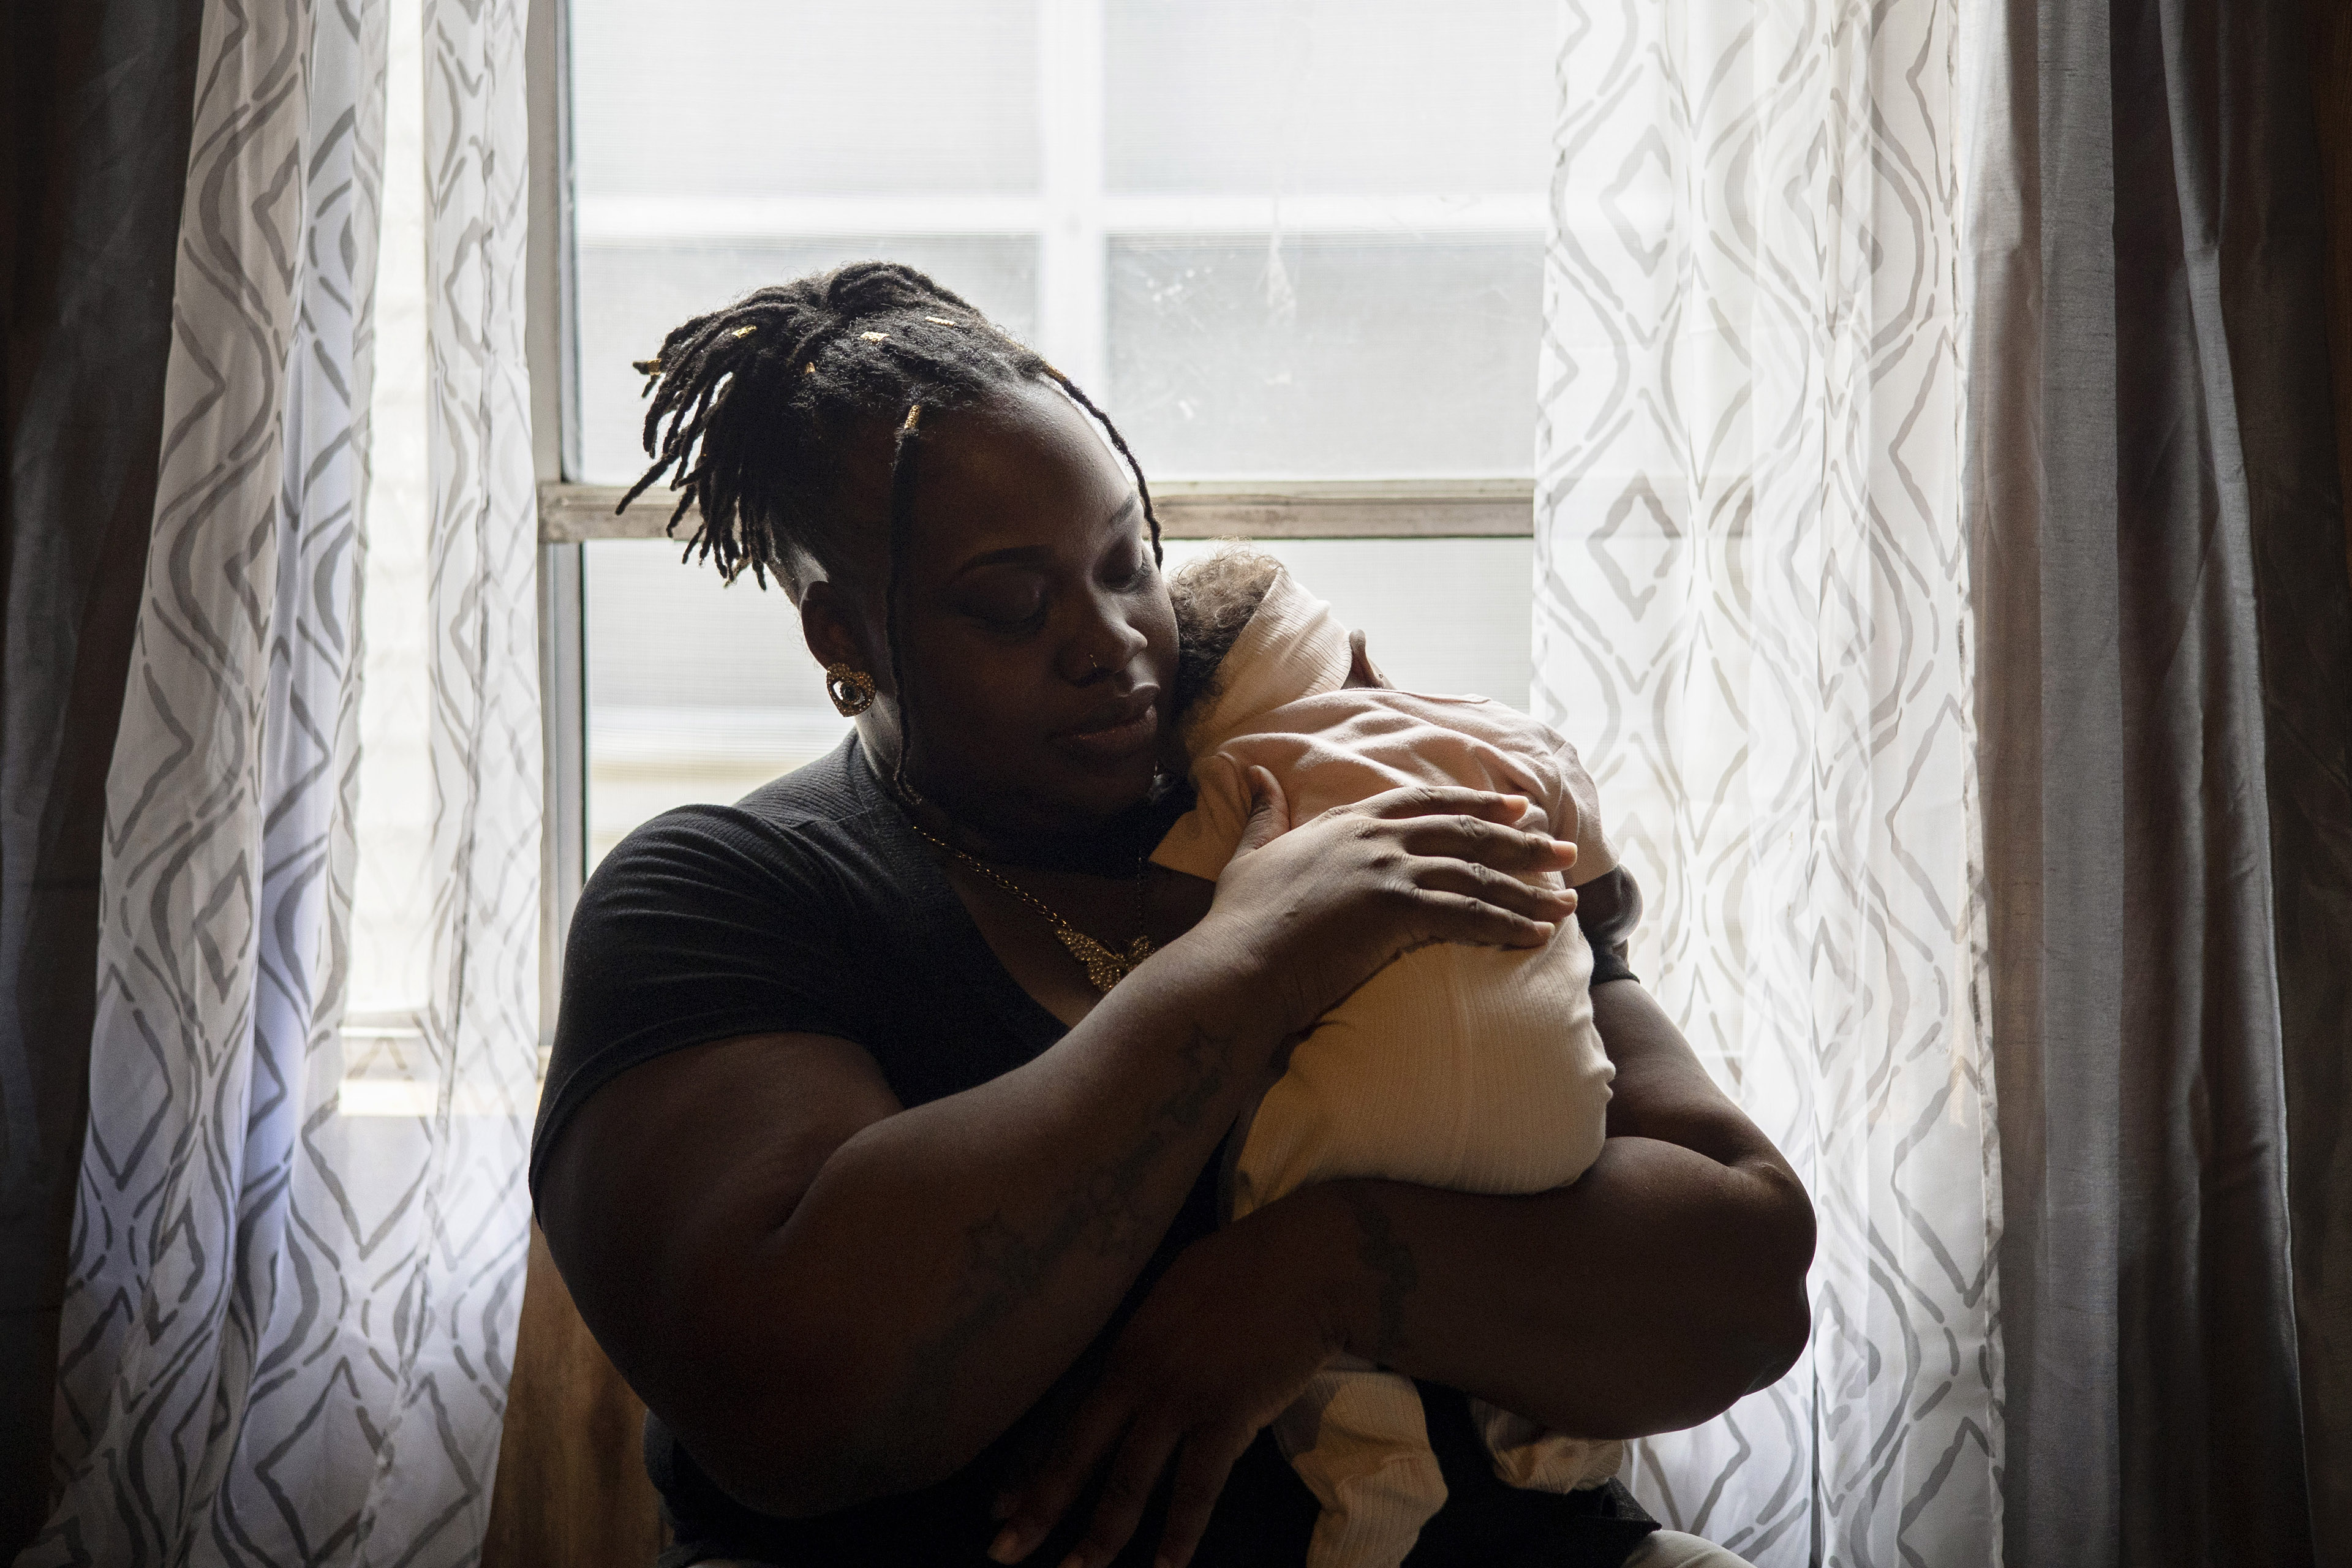 O’laysha Davis, standing in front of a window, holds her infant daughter in a gentle embrace.